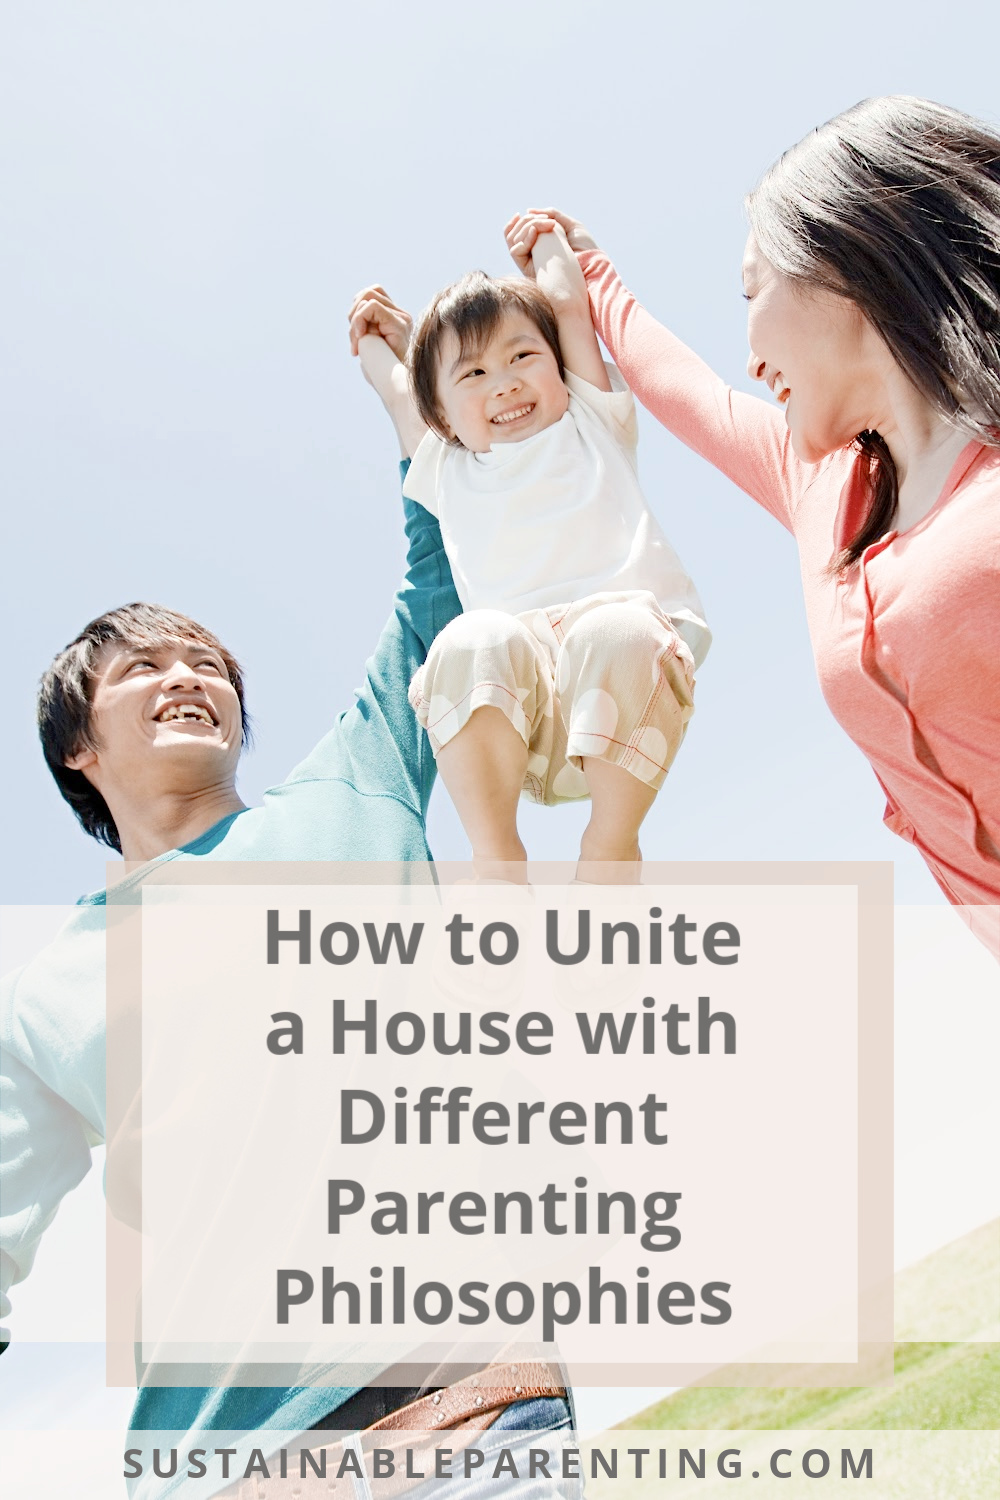 How to Unite a House with Different Parenting Philosophies